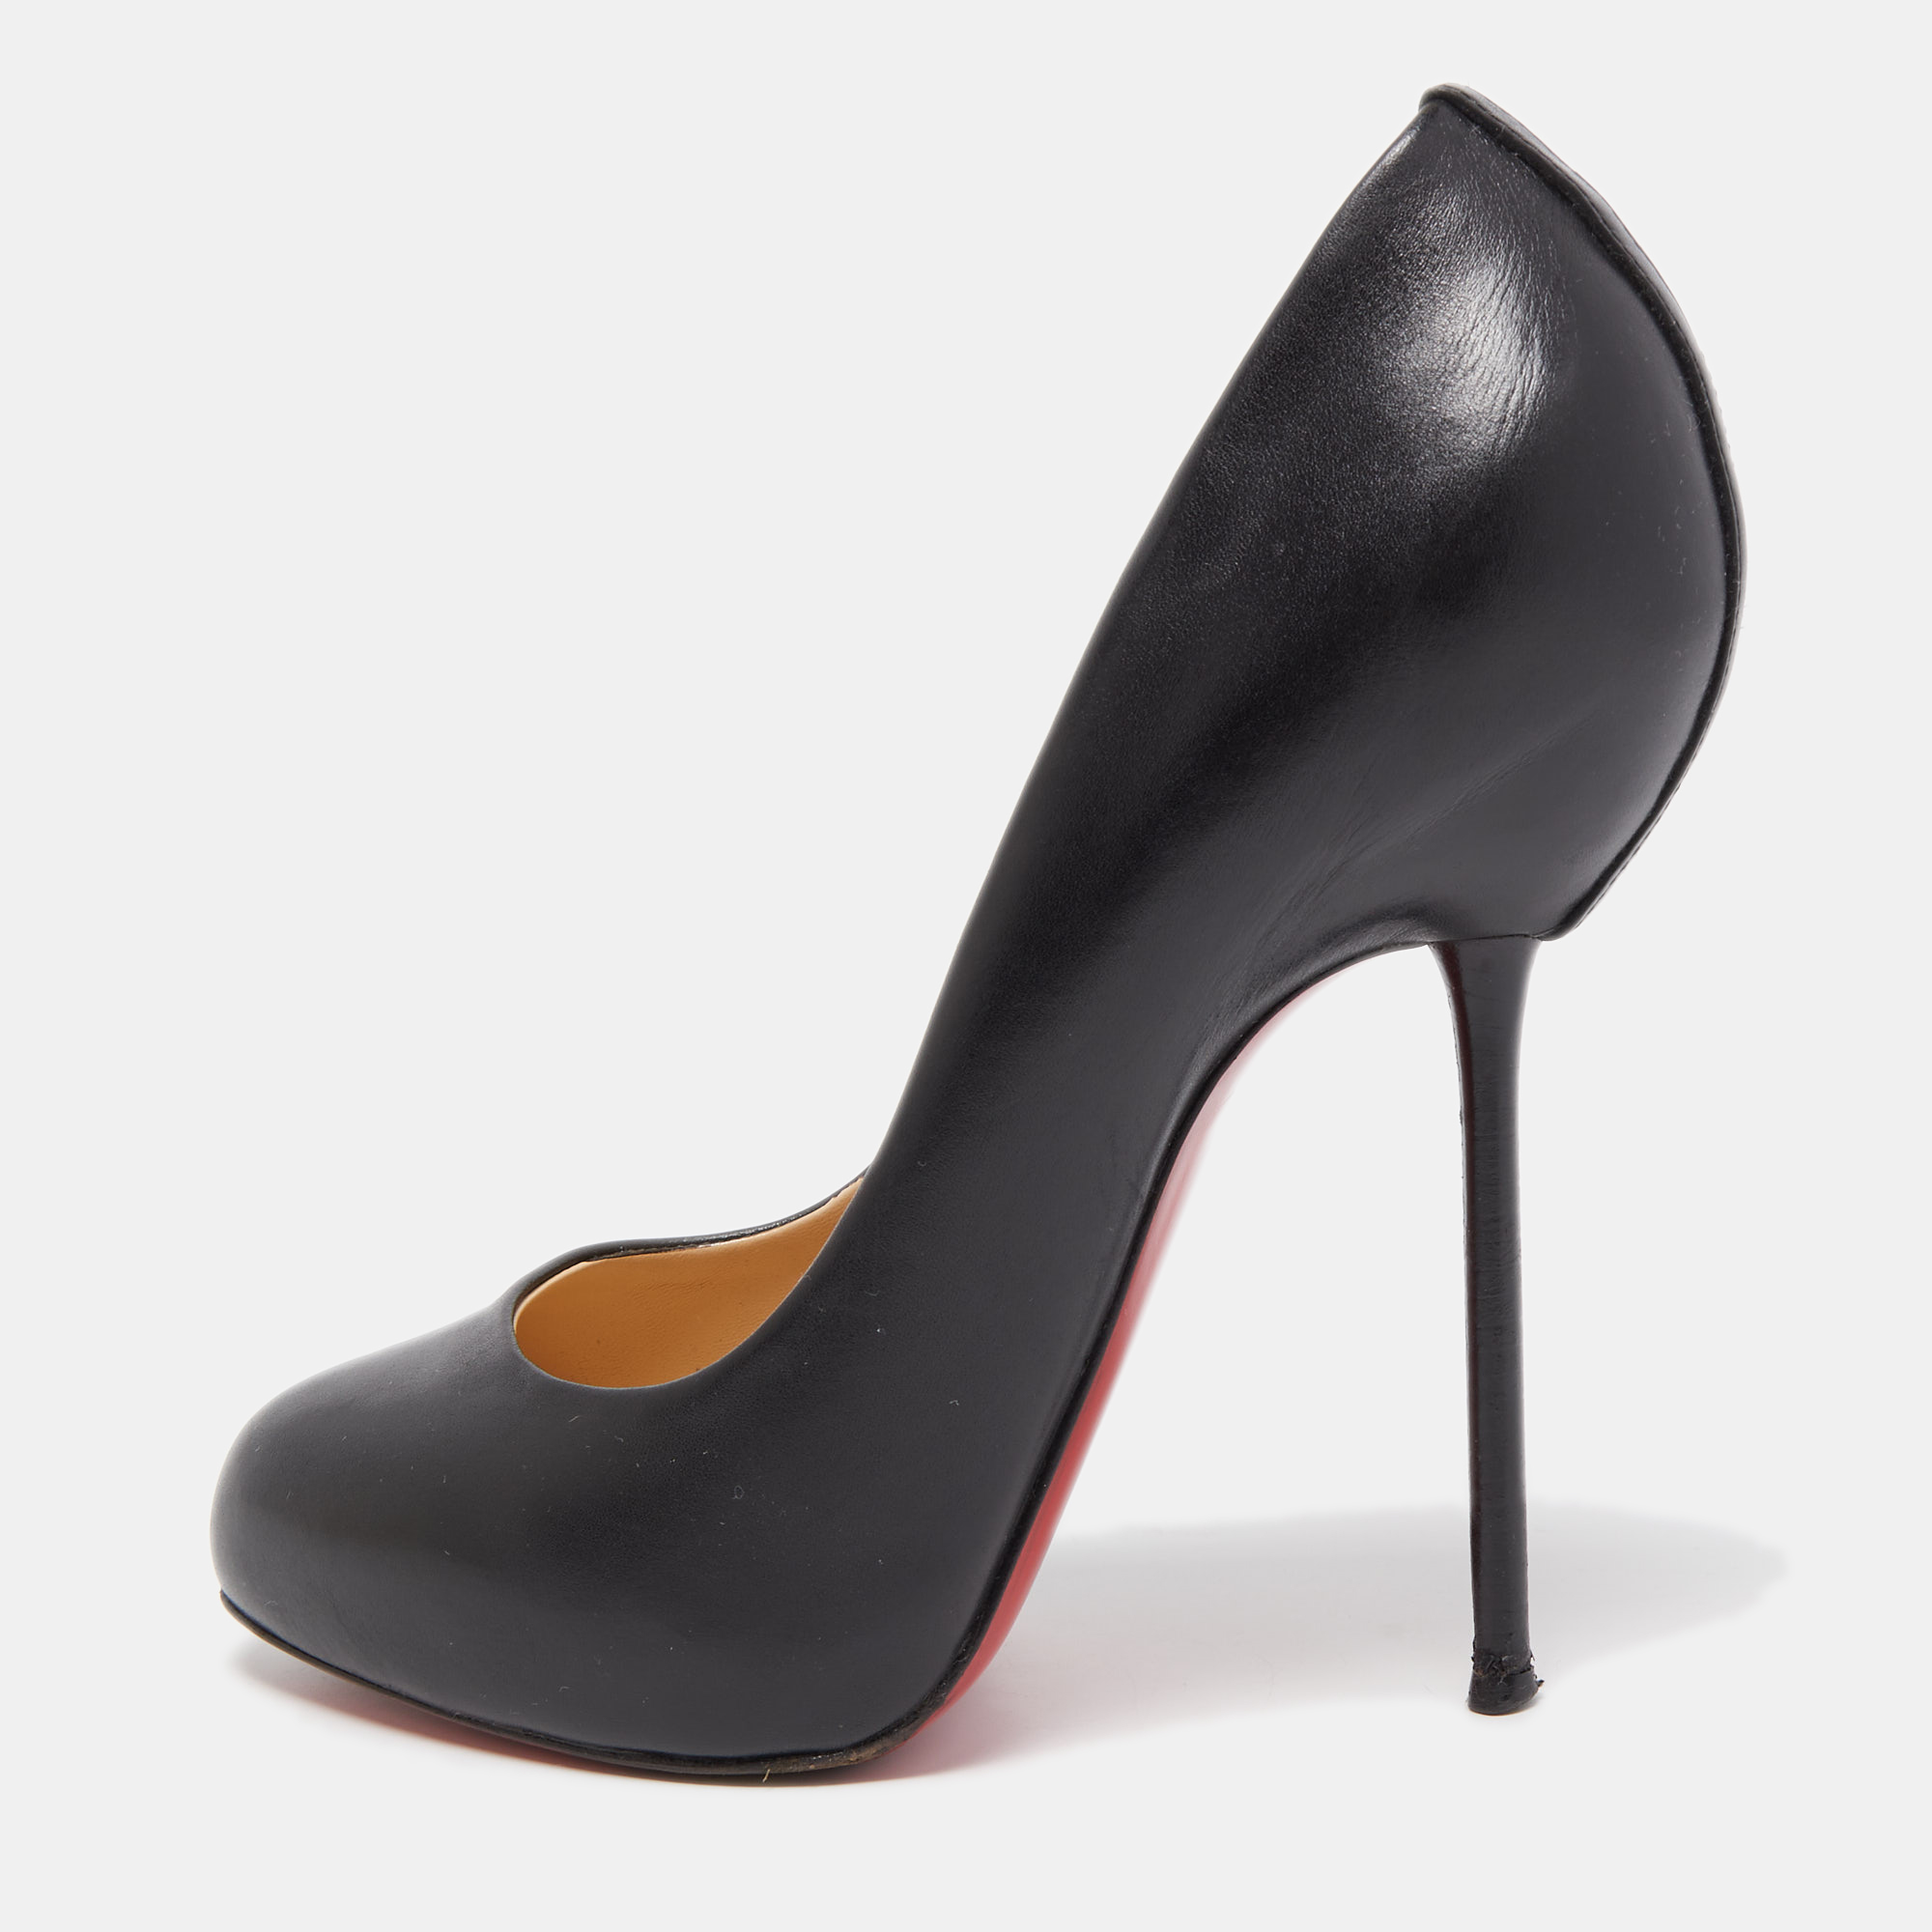 Exhibit an elegant style with this pair of pumps. These branded shoes for women are crafted from quality materials. They are set on durable soles and sleek heels.